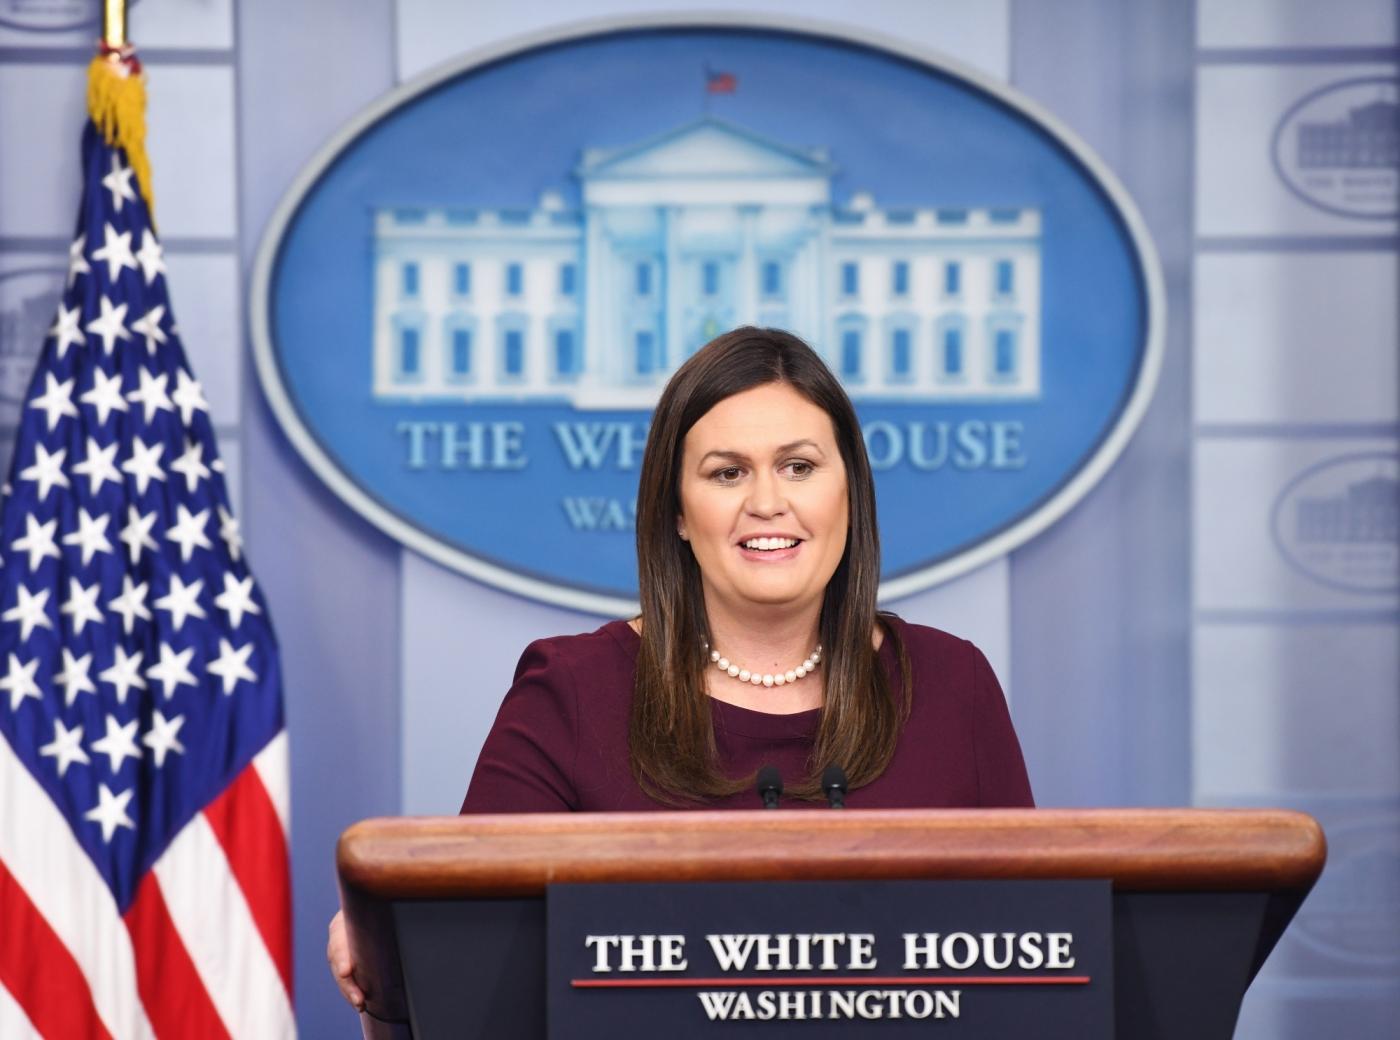 WASHINGTON, Aug. 14, 2018 (Xinhua) -- White House spokesperson Sarah Sanders attends a press briefing at the White House in Washington D.C., the United States, Aug. 14, 2018. The White House said Tuesday that U.S. National Security Advisor John Bolton will meet his Russian counterpart in Geneva of Switzerland next week as a "follow-up" to the Helsinki summit last month between U.S. President Donald Trump and Russian President Vladimir Putin. (Xinhua/Liu Jie)/IANS) by .